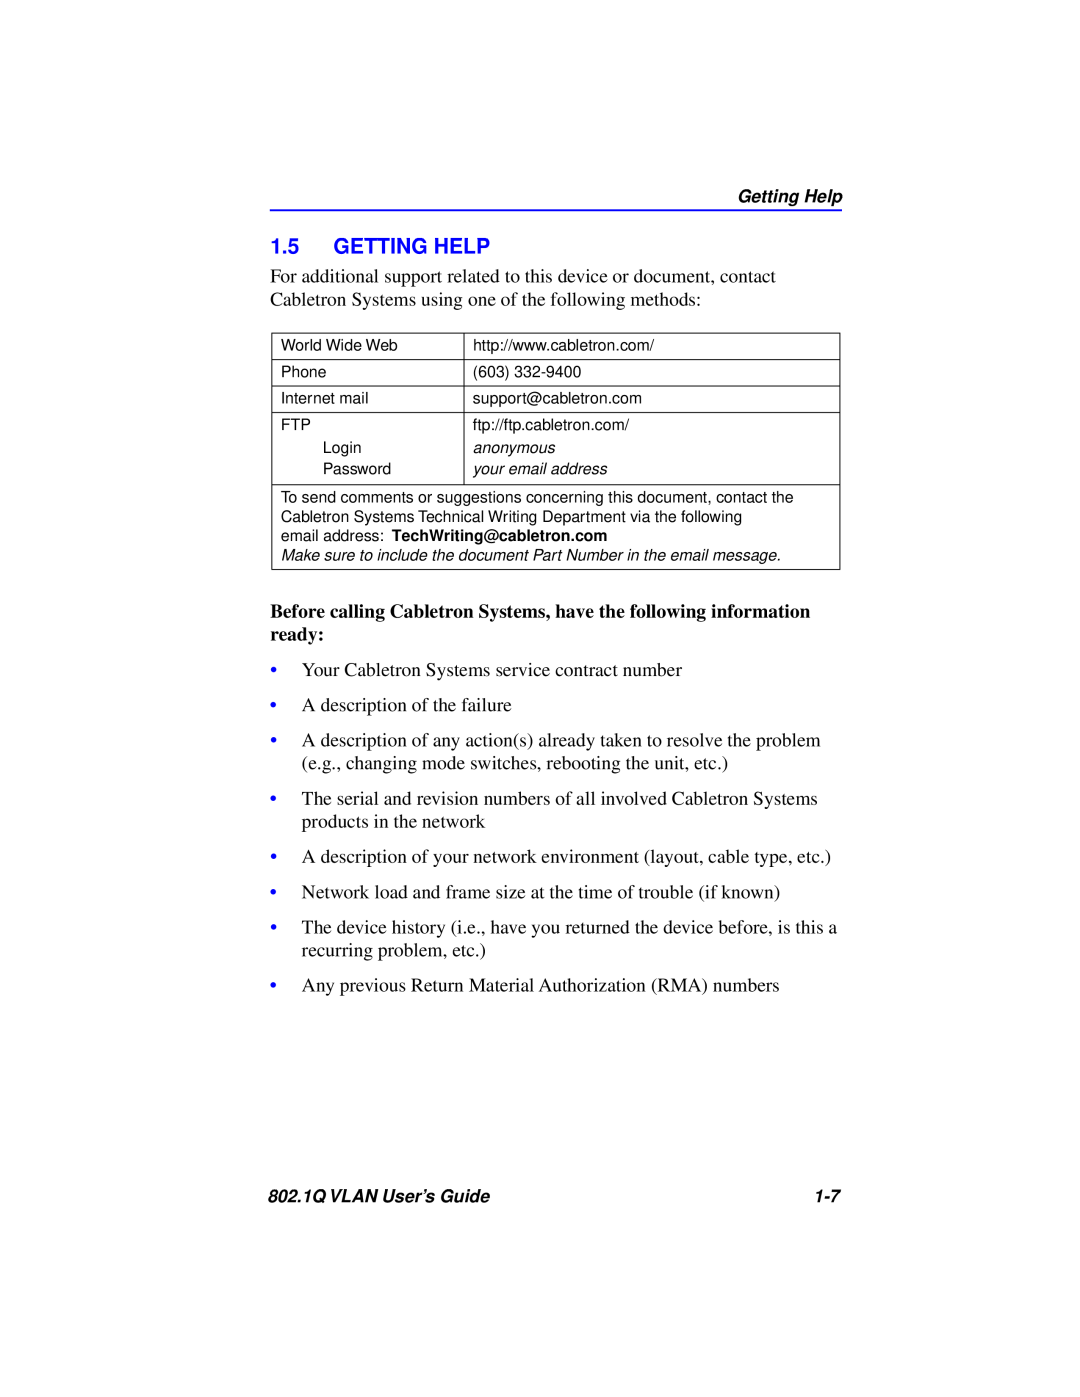 Cabletron Systems 802.1Q manual Getting Help 